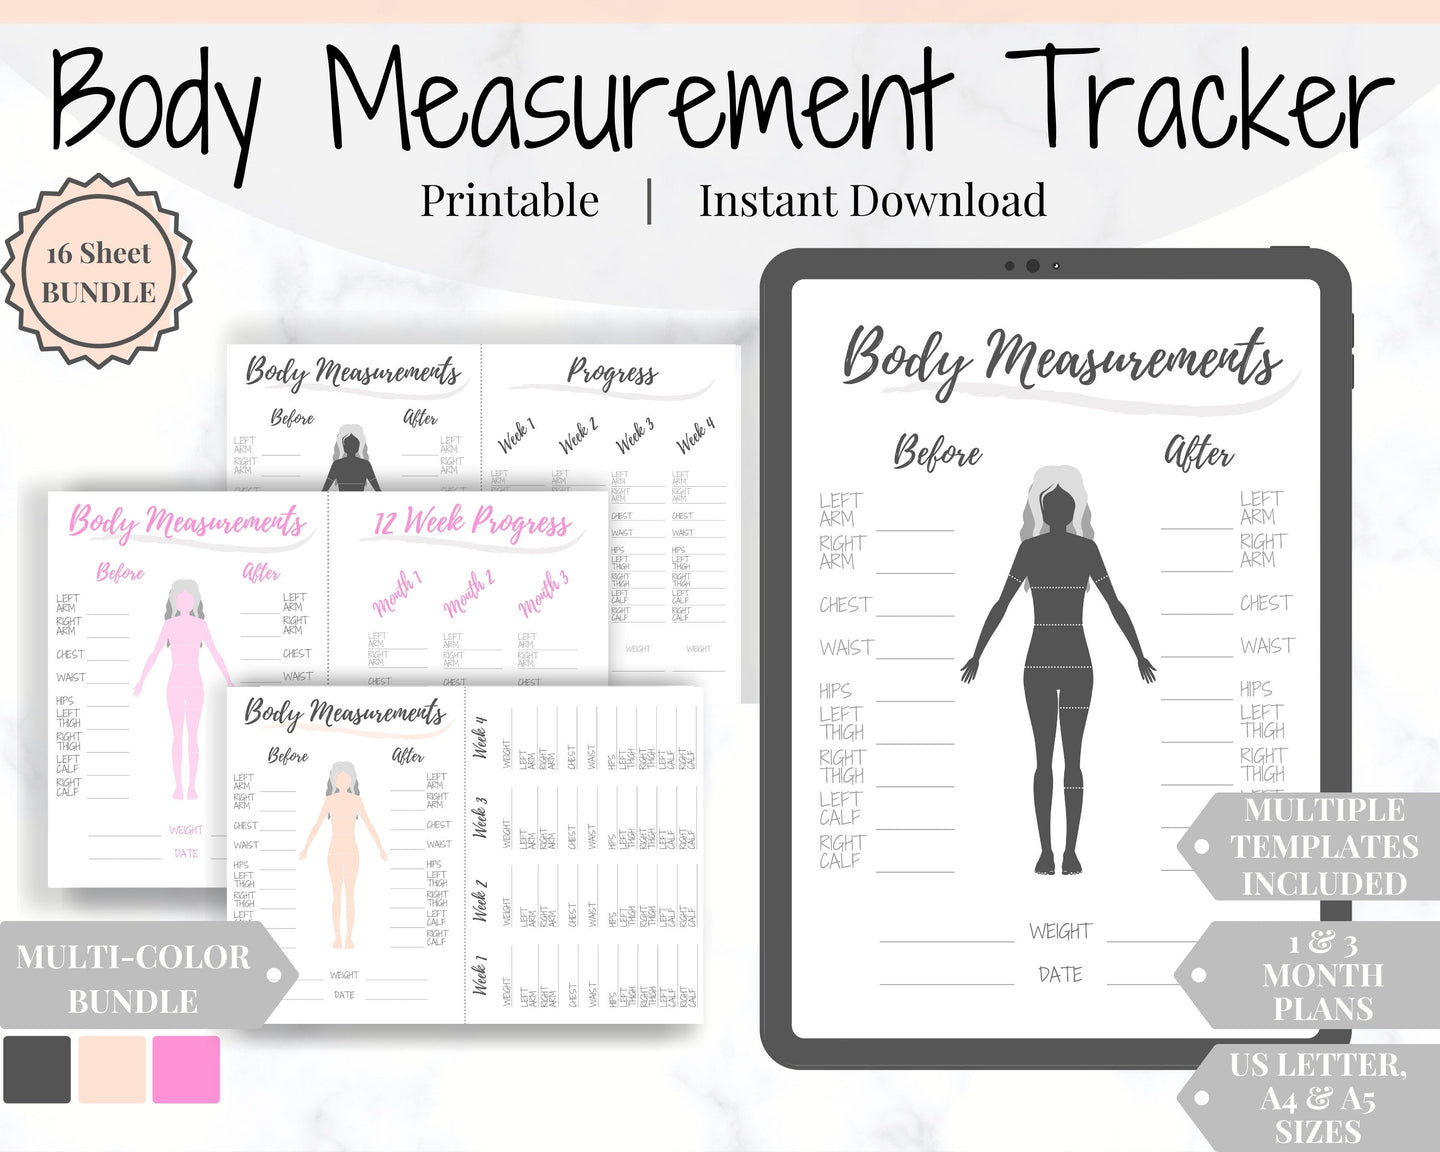 Body Measurement Fitness Planner for Weight Loss. Template Tracker Printable for Wellness & Bullet Journal. Slimming World Weight Watchers